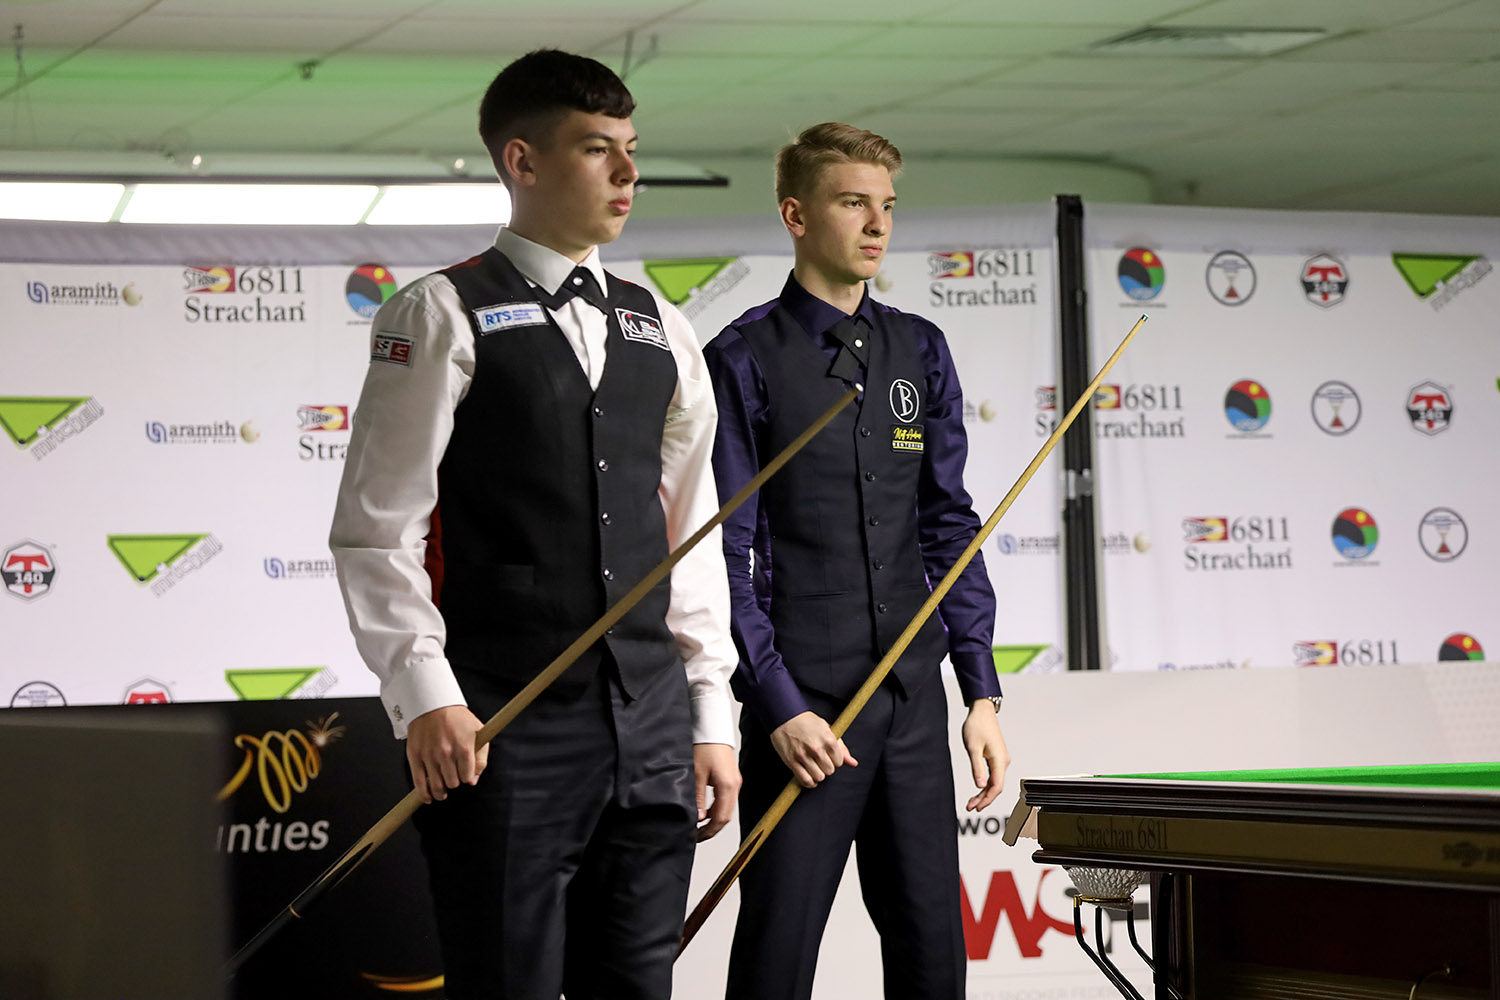 WSF Championships 2023  Event Information - WPBSA